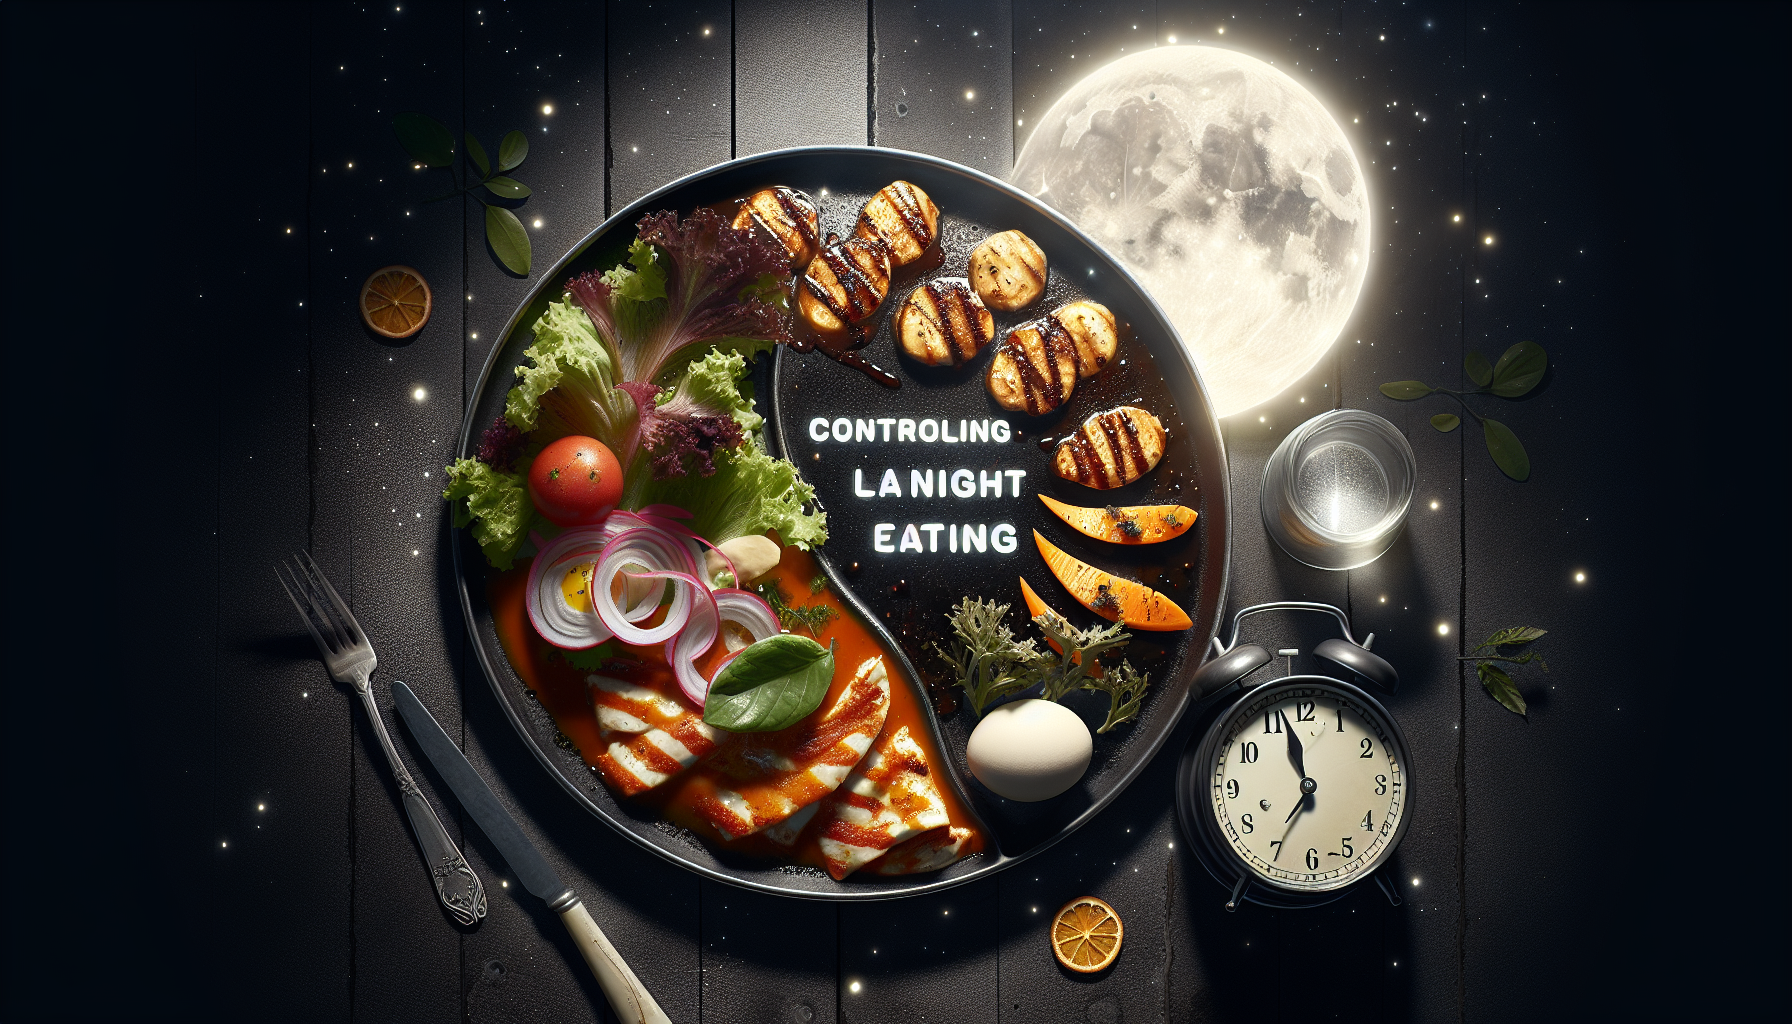 How Can I Avoid Eating Too Much Late At Night?